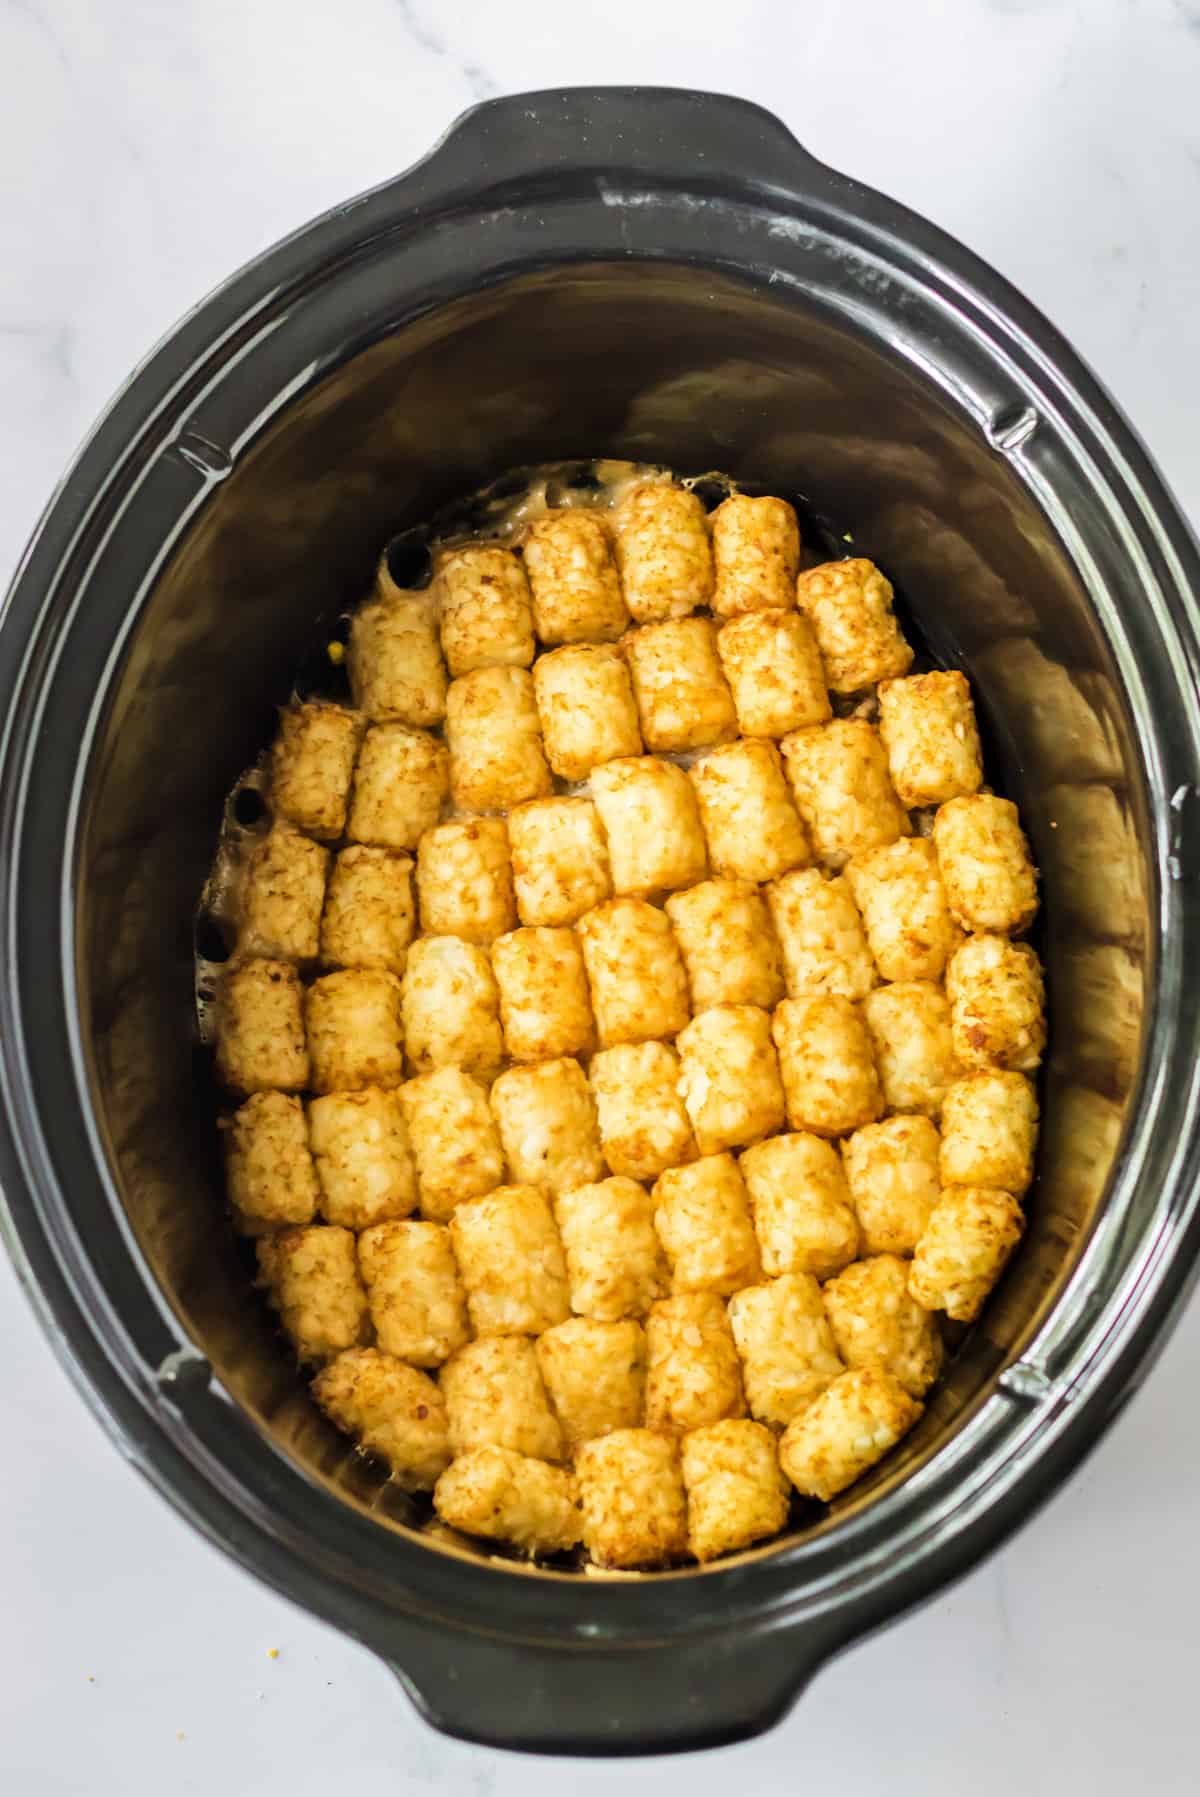 Tater tots in a neat and even layer in crock pot.